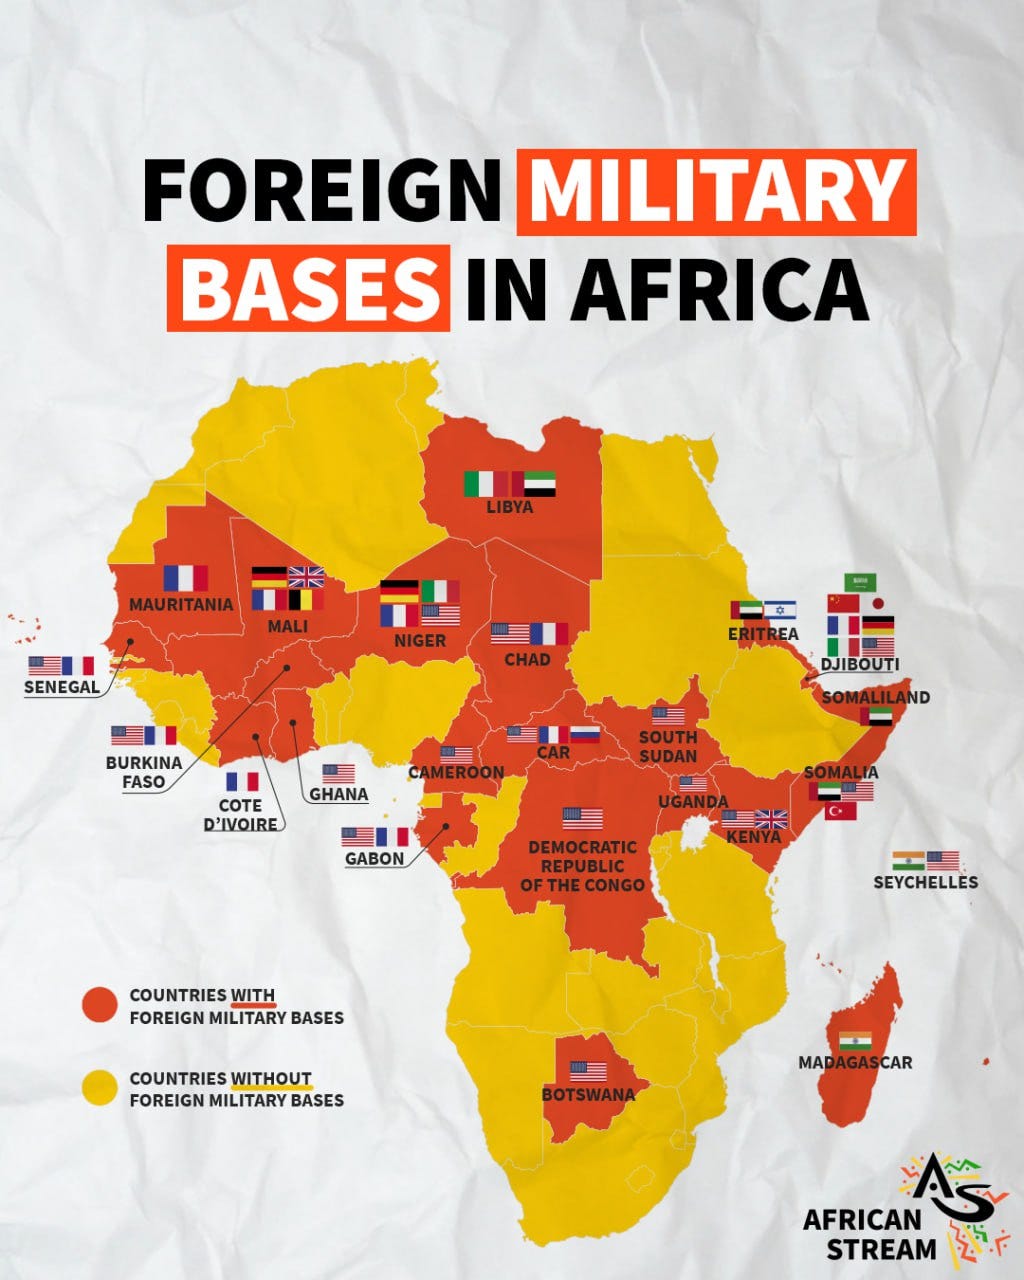 A map of Africa showing that foreign military bases are concentrated in East, West, and Central Africa